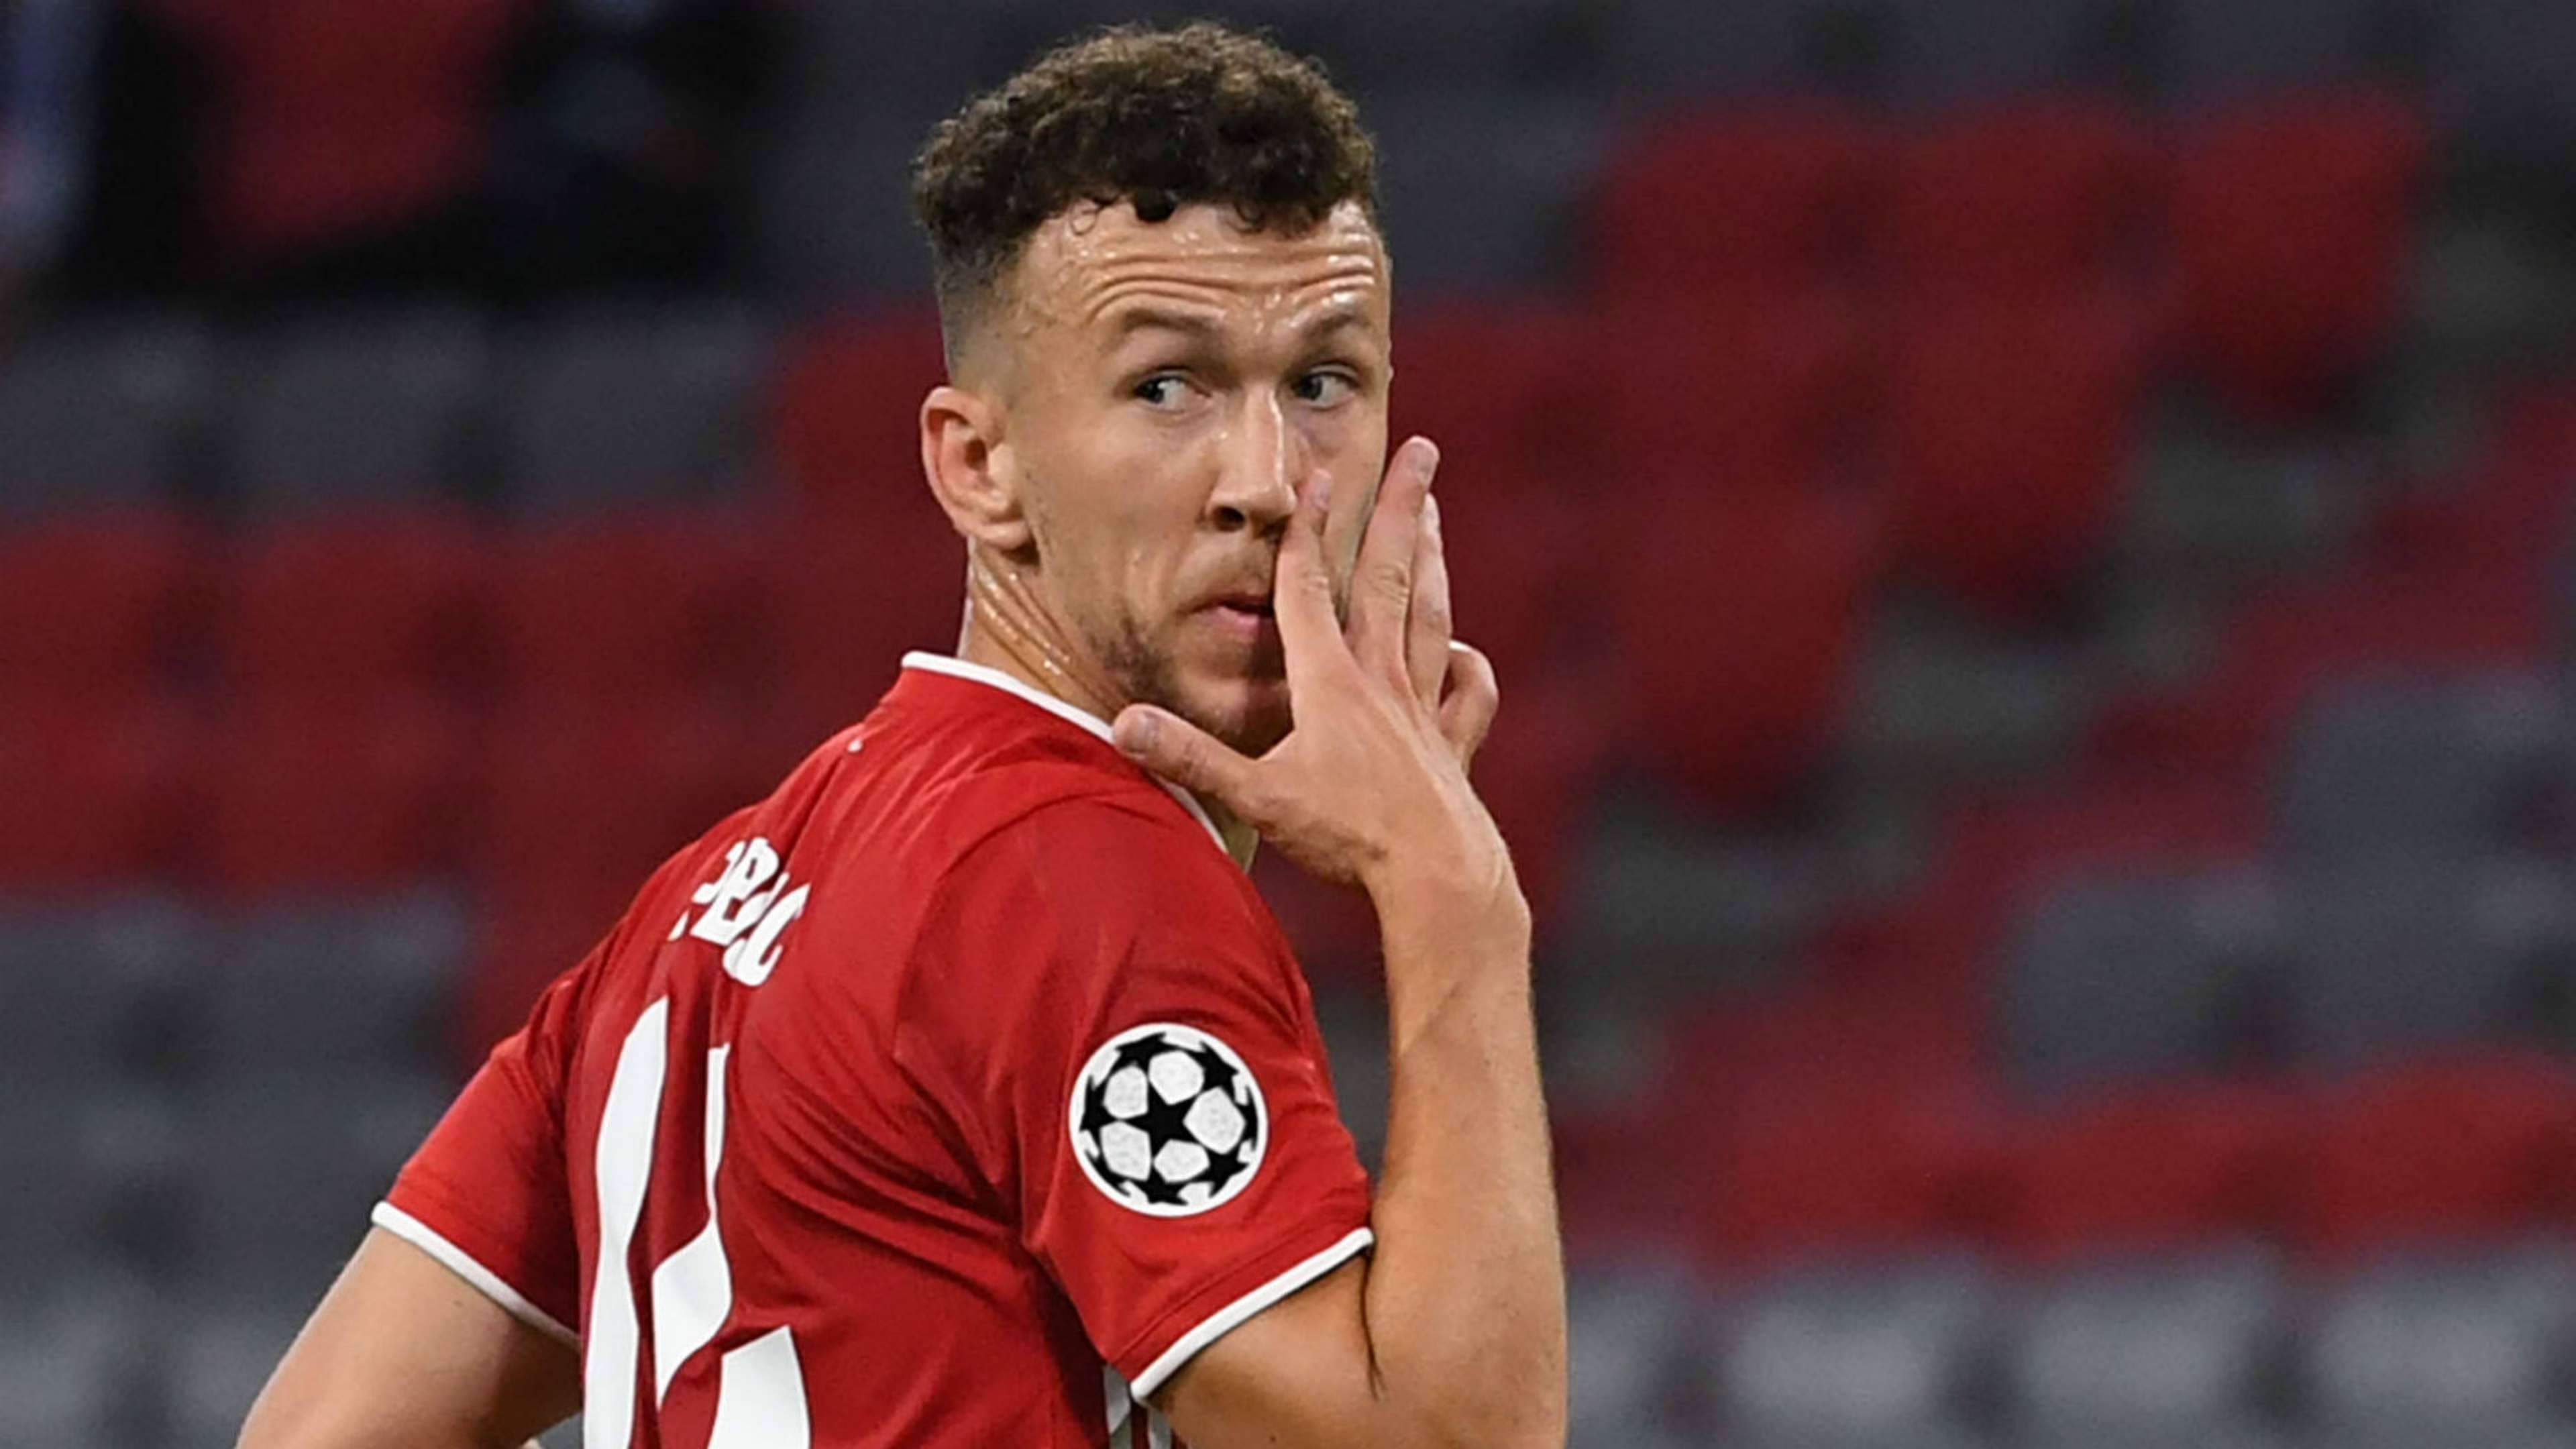 GERMANY ONLY: IVAN PERISIC BAYERN MÜNCHEN CHAMPIONS LEAGUE 08082020